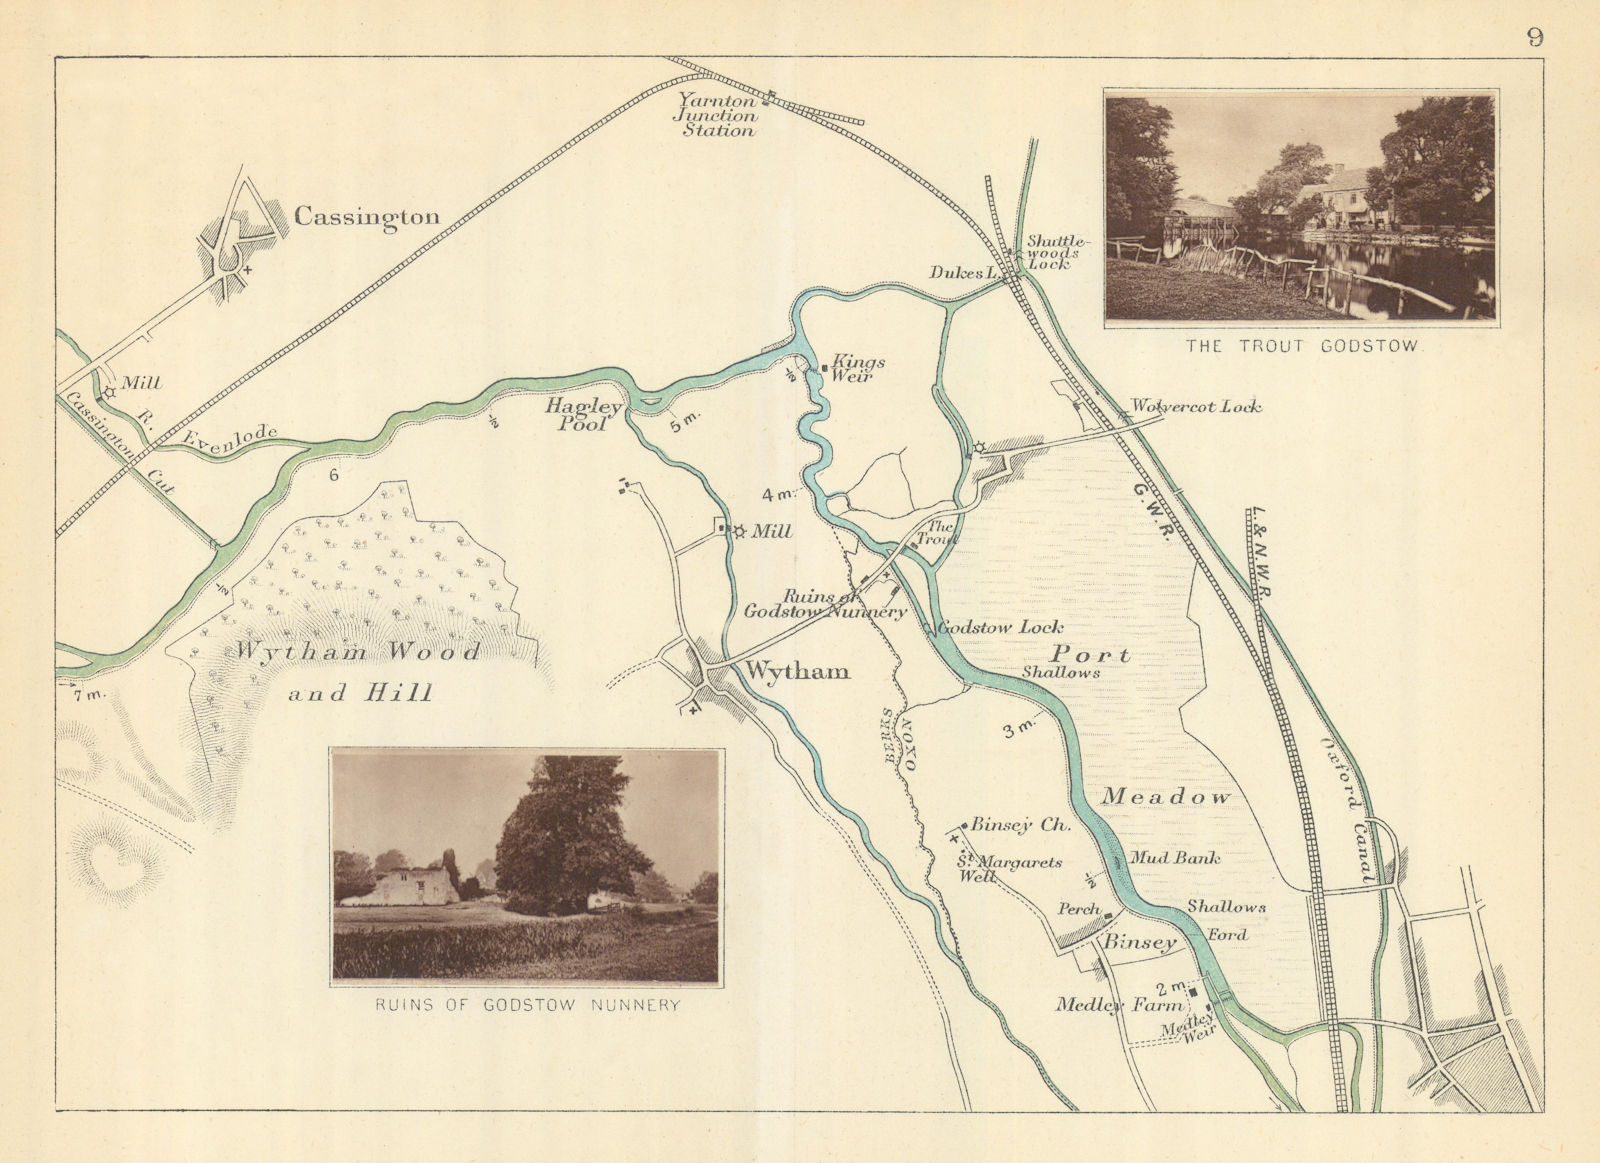 RIVER THAMES - Cassington - Wytham - Godstow - Binsey. The Trout. TAUNT 1879 map